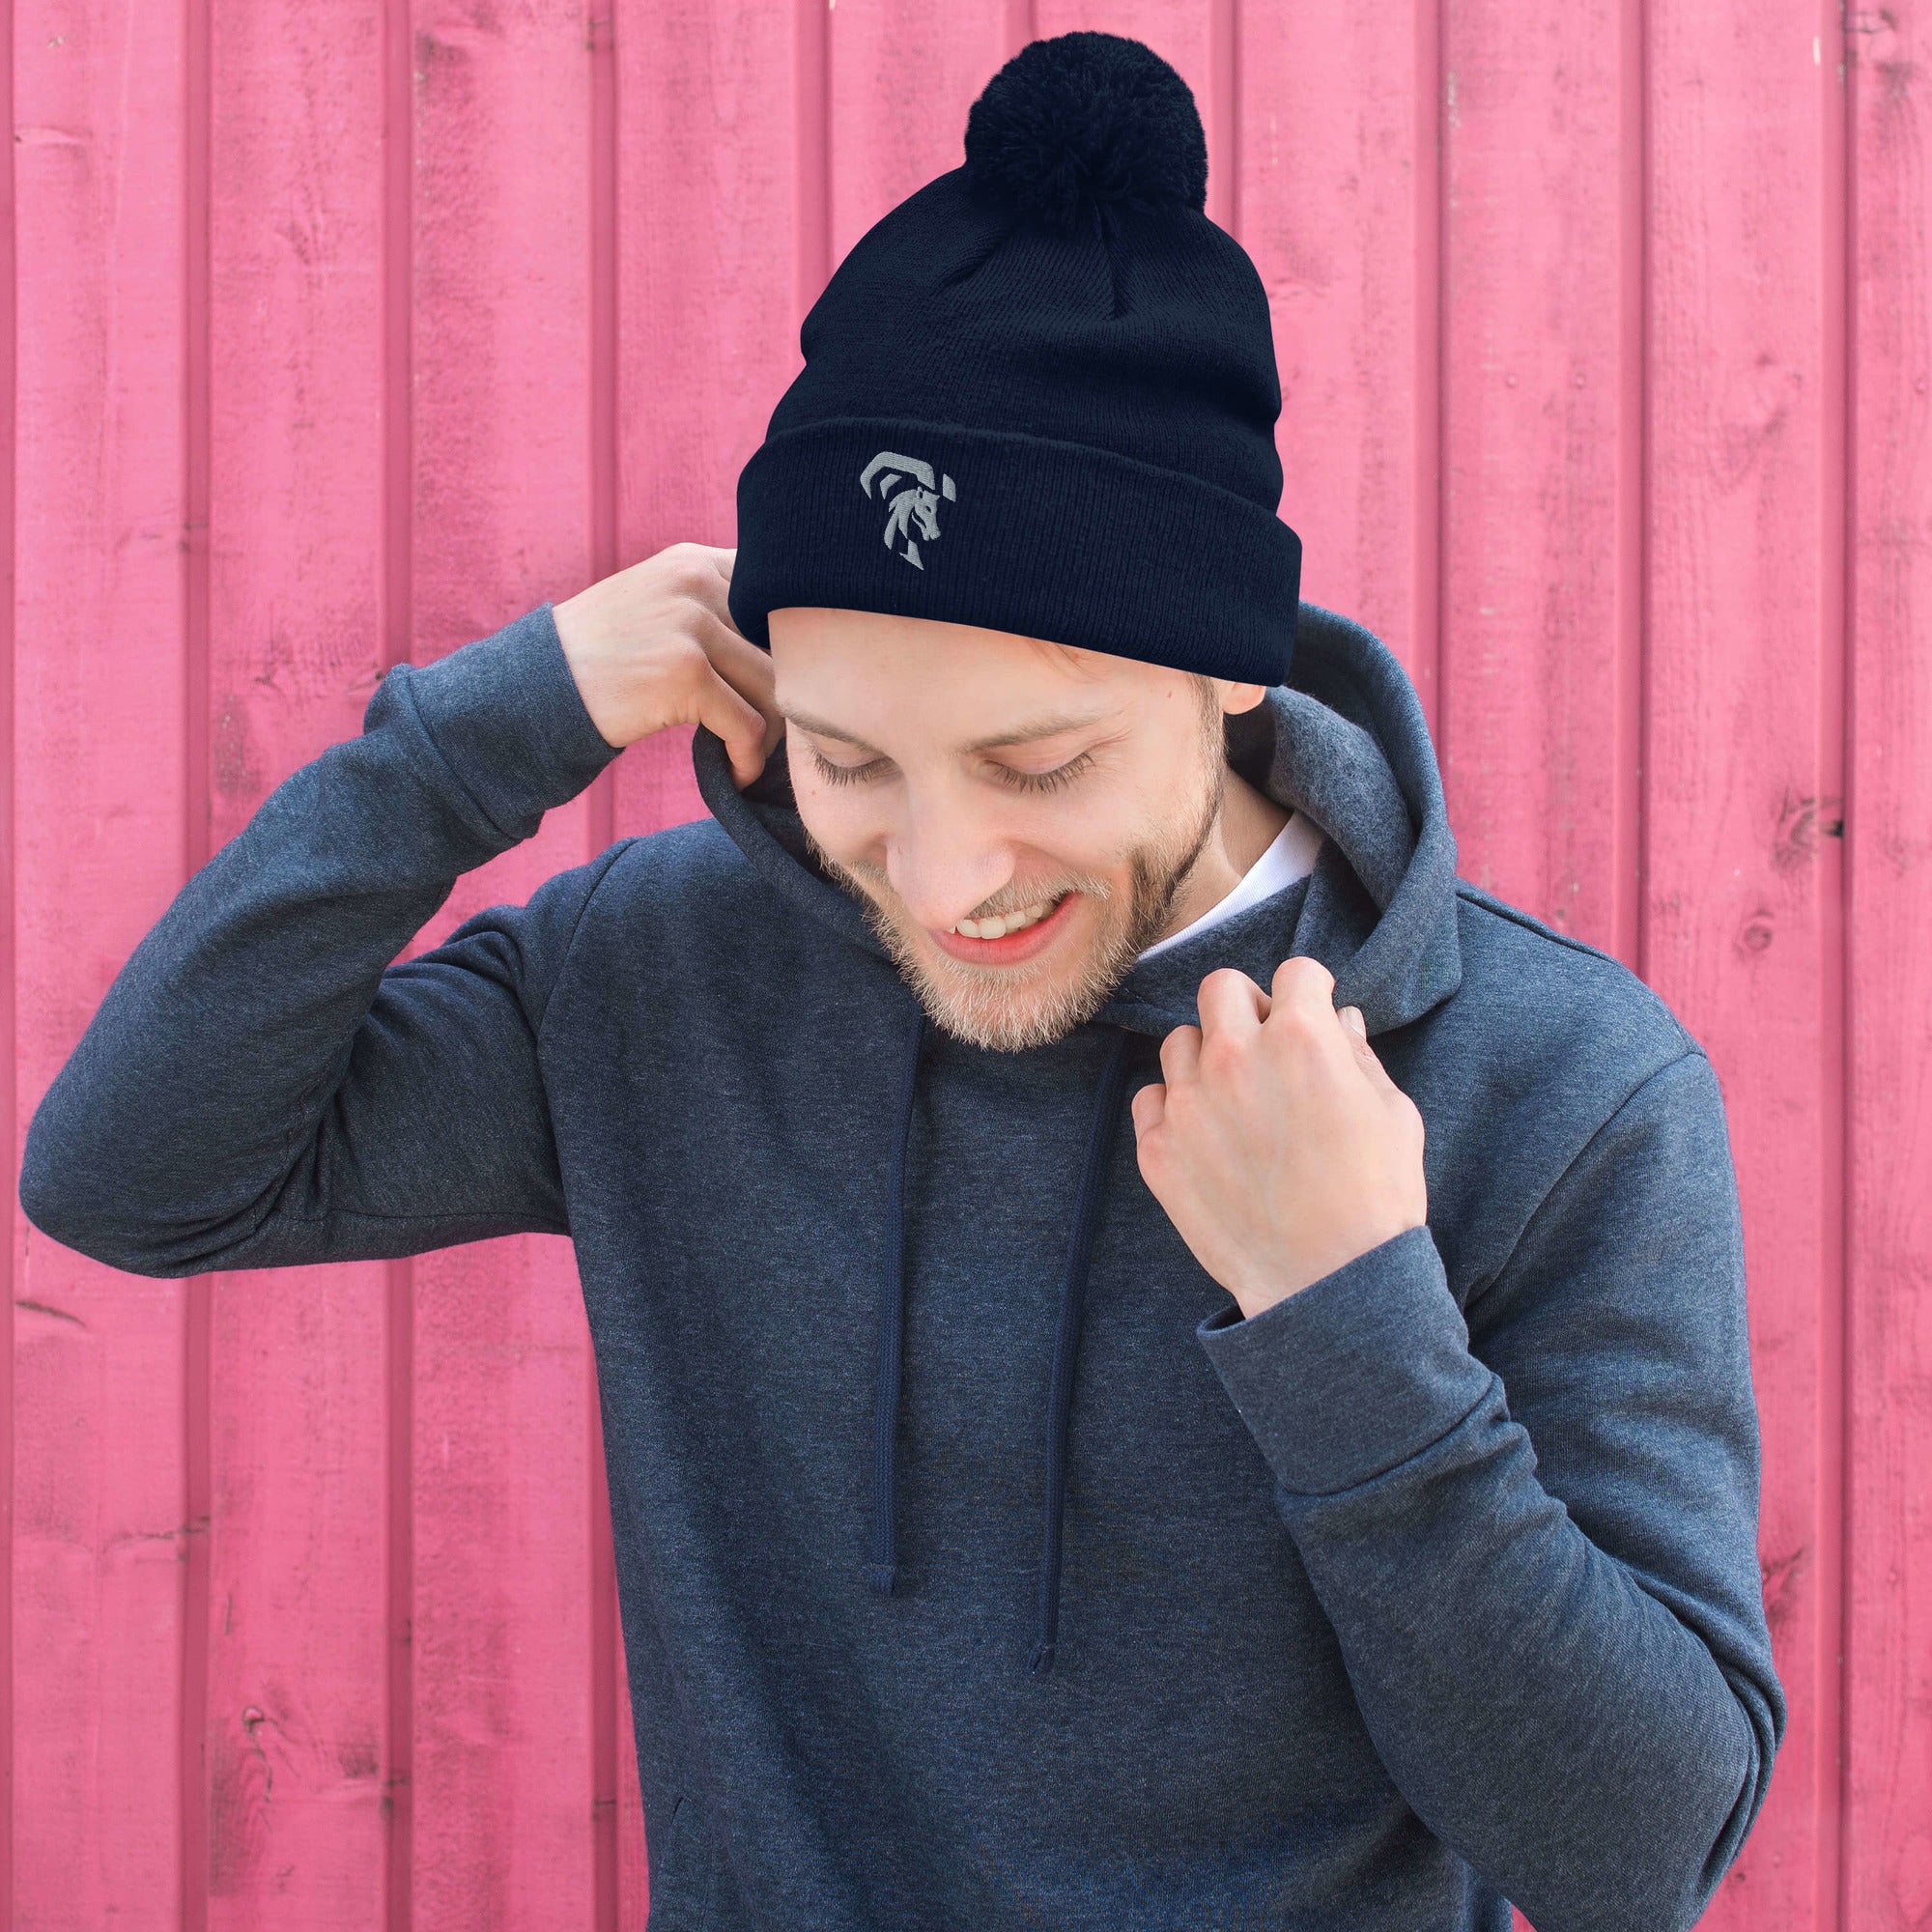 Unisex Pom-Pom Beanie: Filly Style for Fashion and Warmth